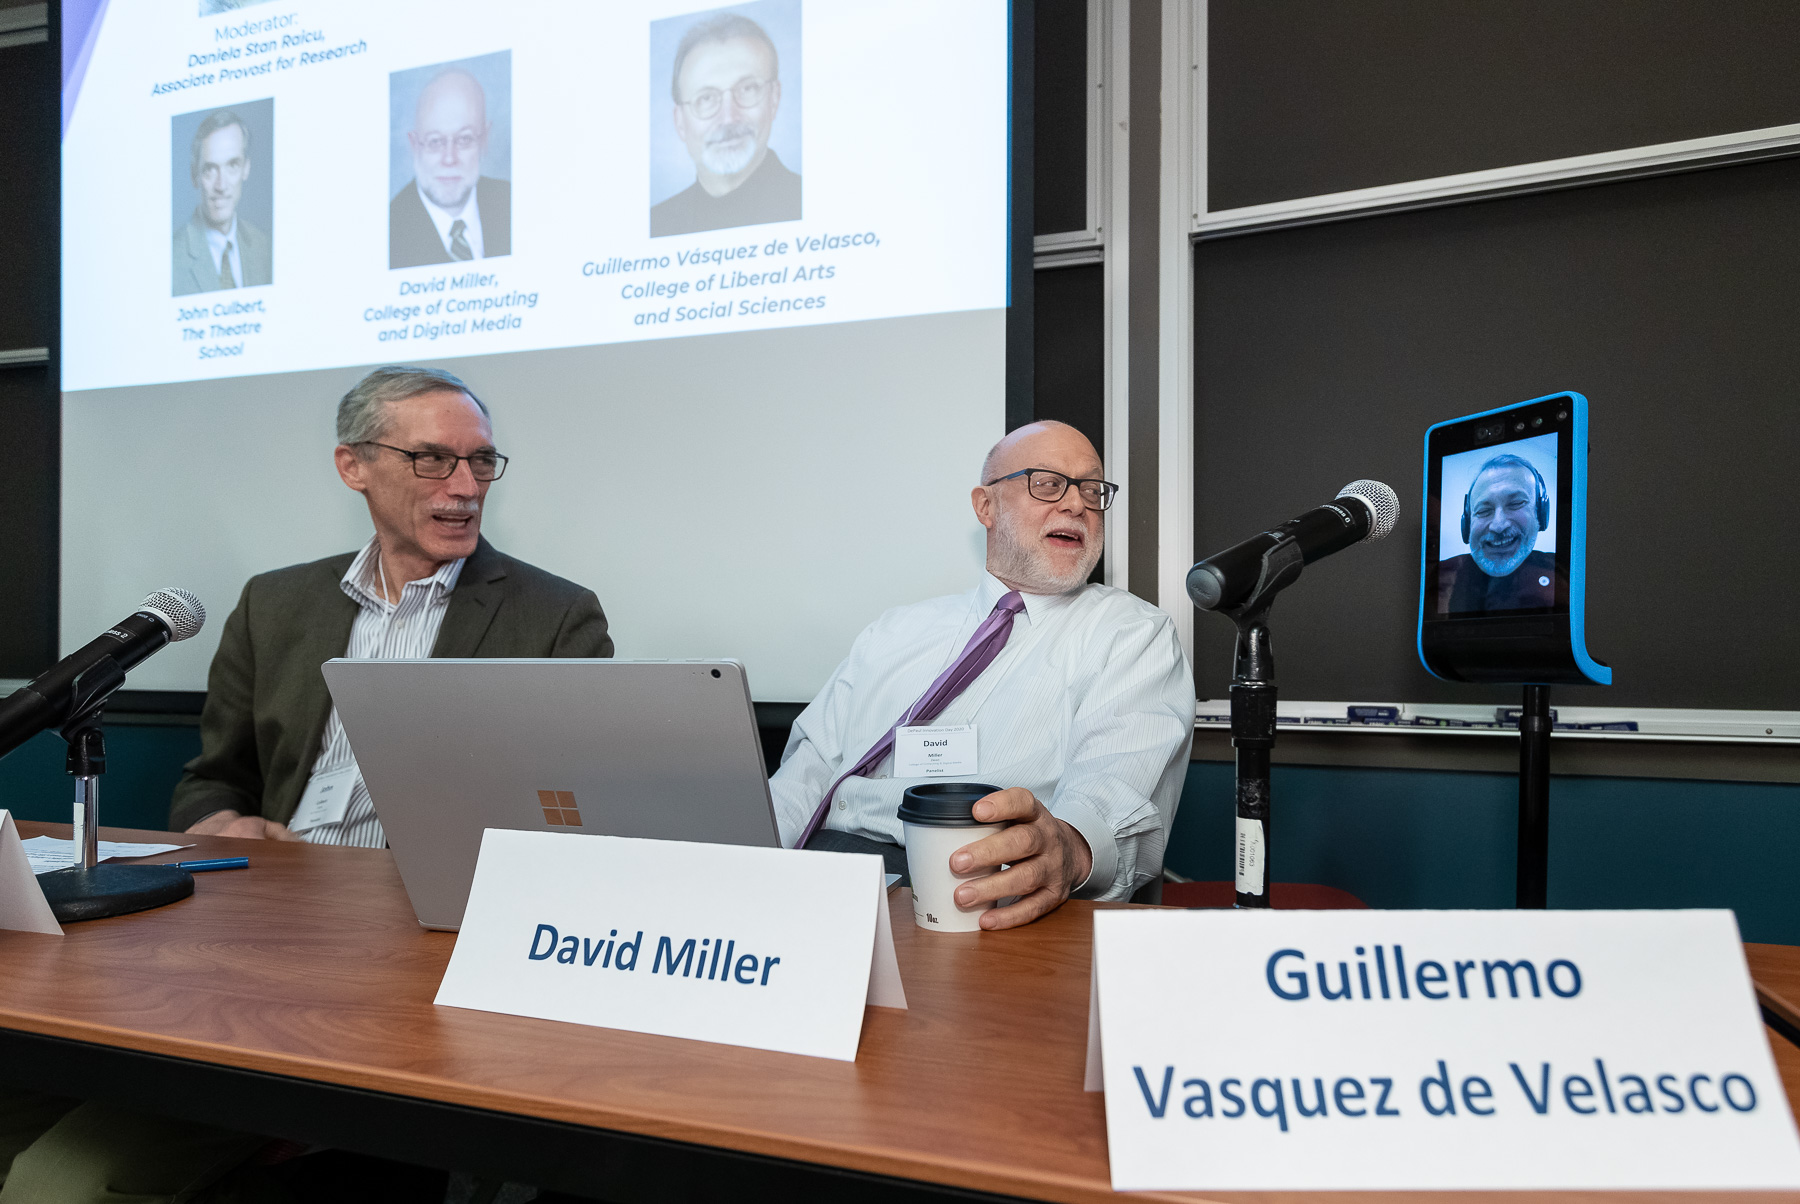 John Culbert, dean of The Theatre School, left, and David Miller, dean of the College of Computing and Digital Media, center, hosted a panel discussion along with Guillermo Vásquez de Velasco, dean of the College of Liberal Arts and Social Sciences, who participated via a telepresence robot. (DePaul University/Jeff Carrion)